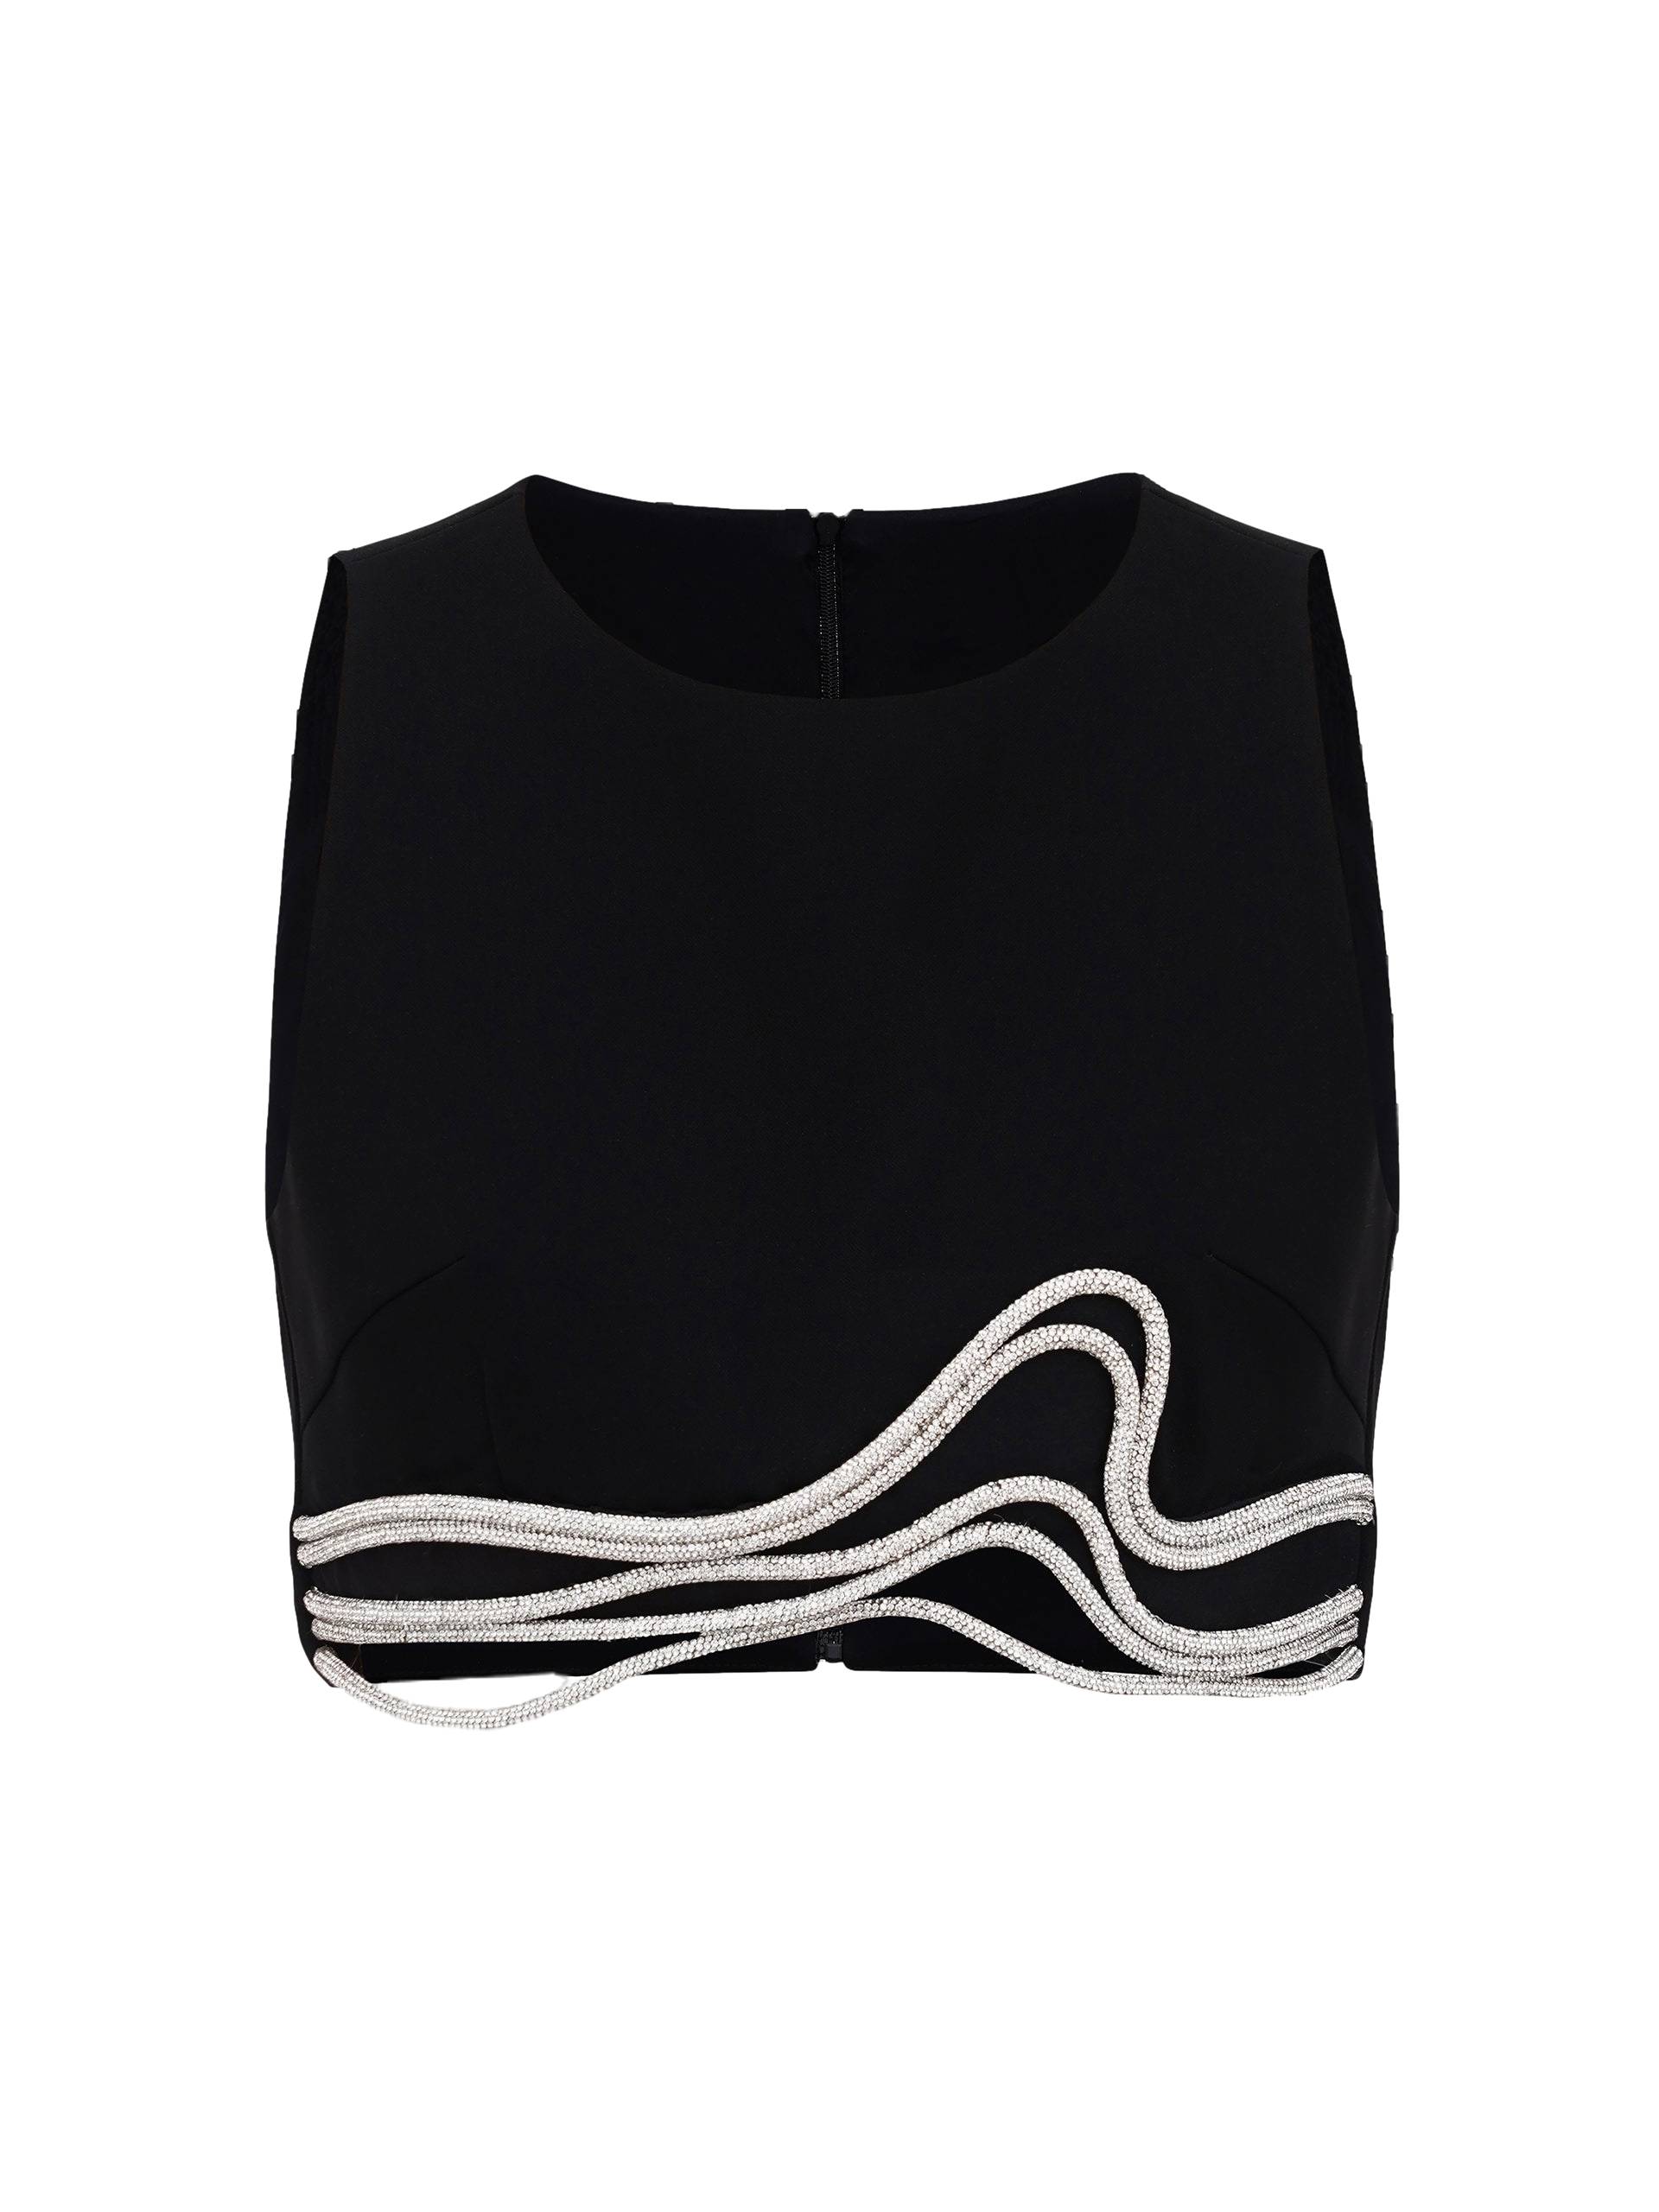 Cutout Embellished Top von NDS The Label